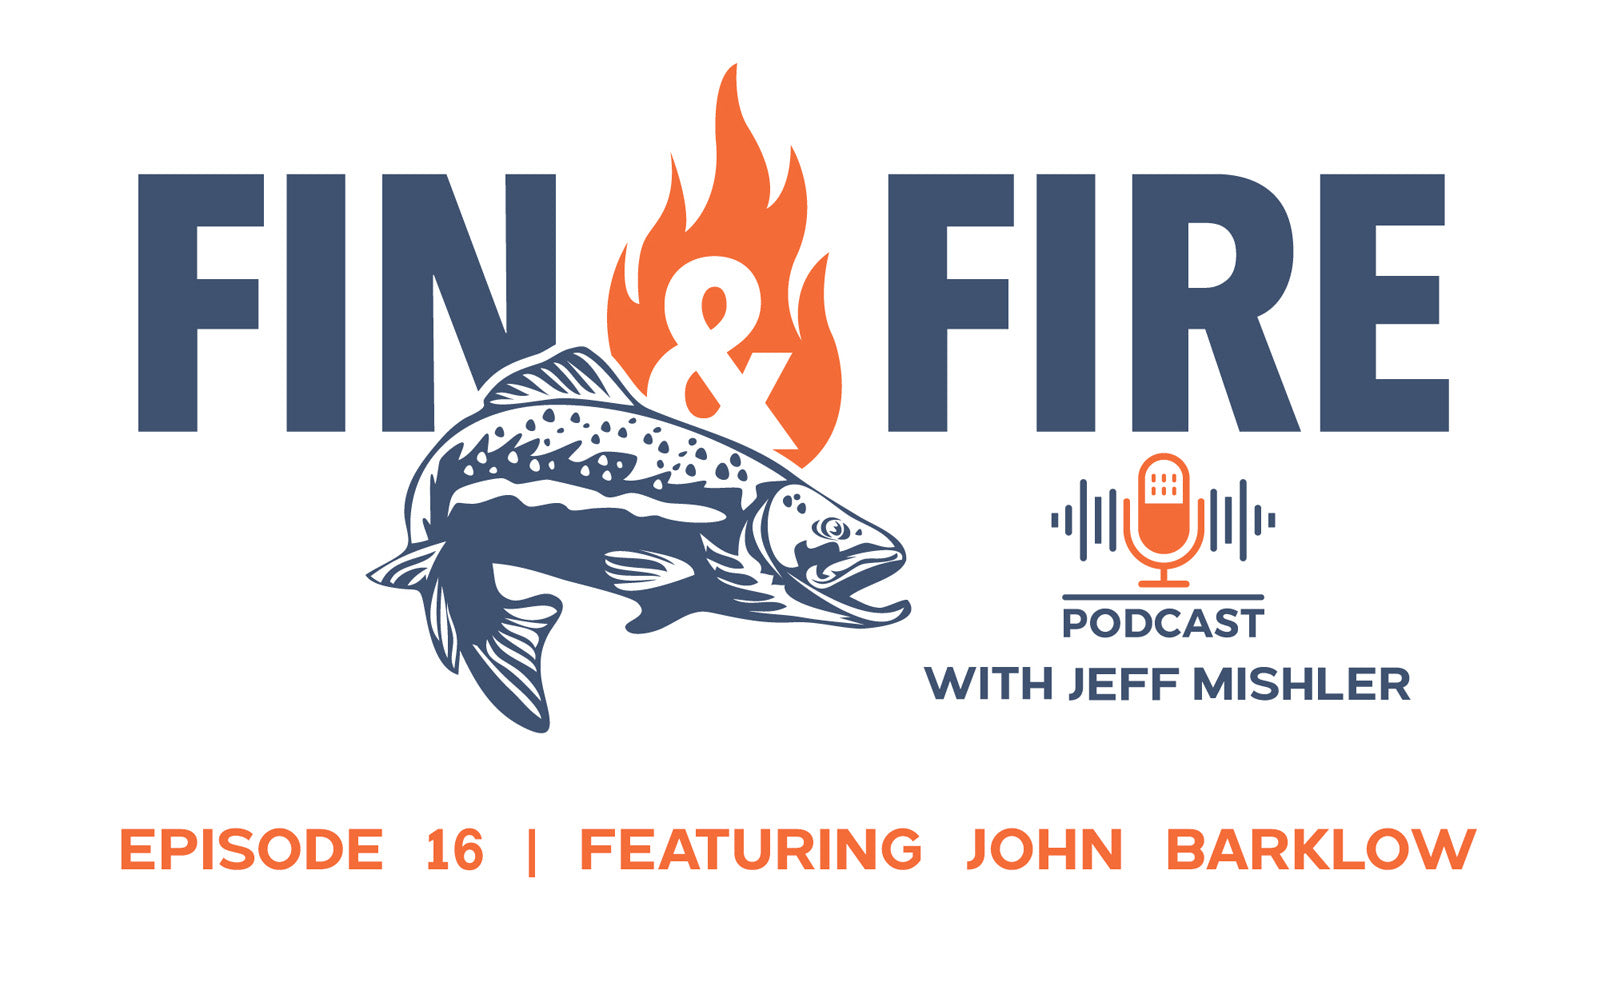 Episode 16 Featuring John Barklow---Senior Product Manager at Sitka Gear and Survival Expert